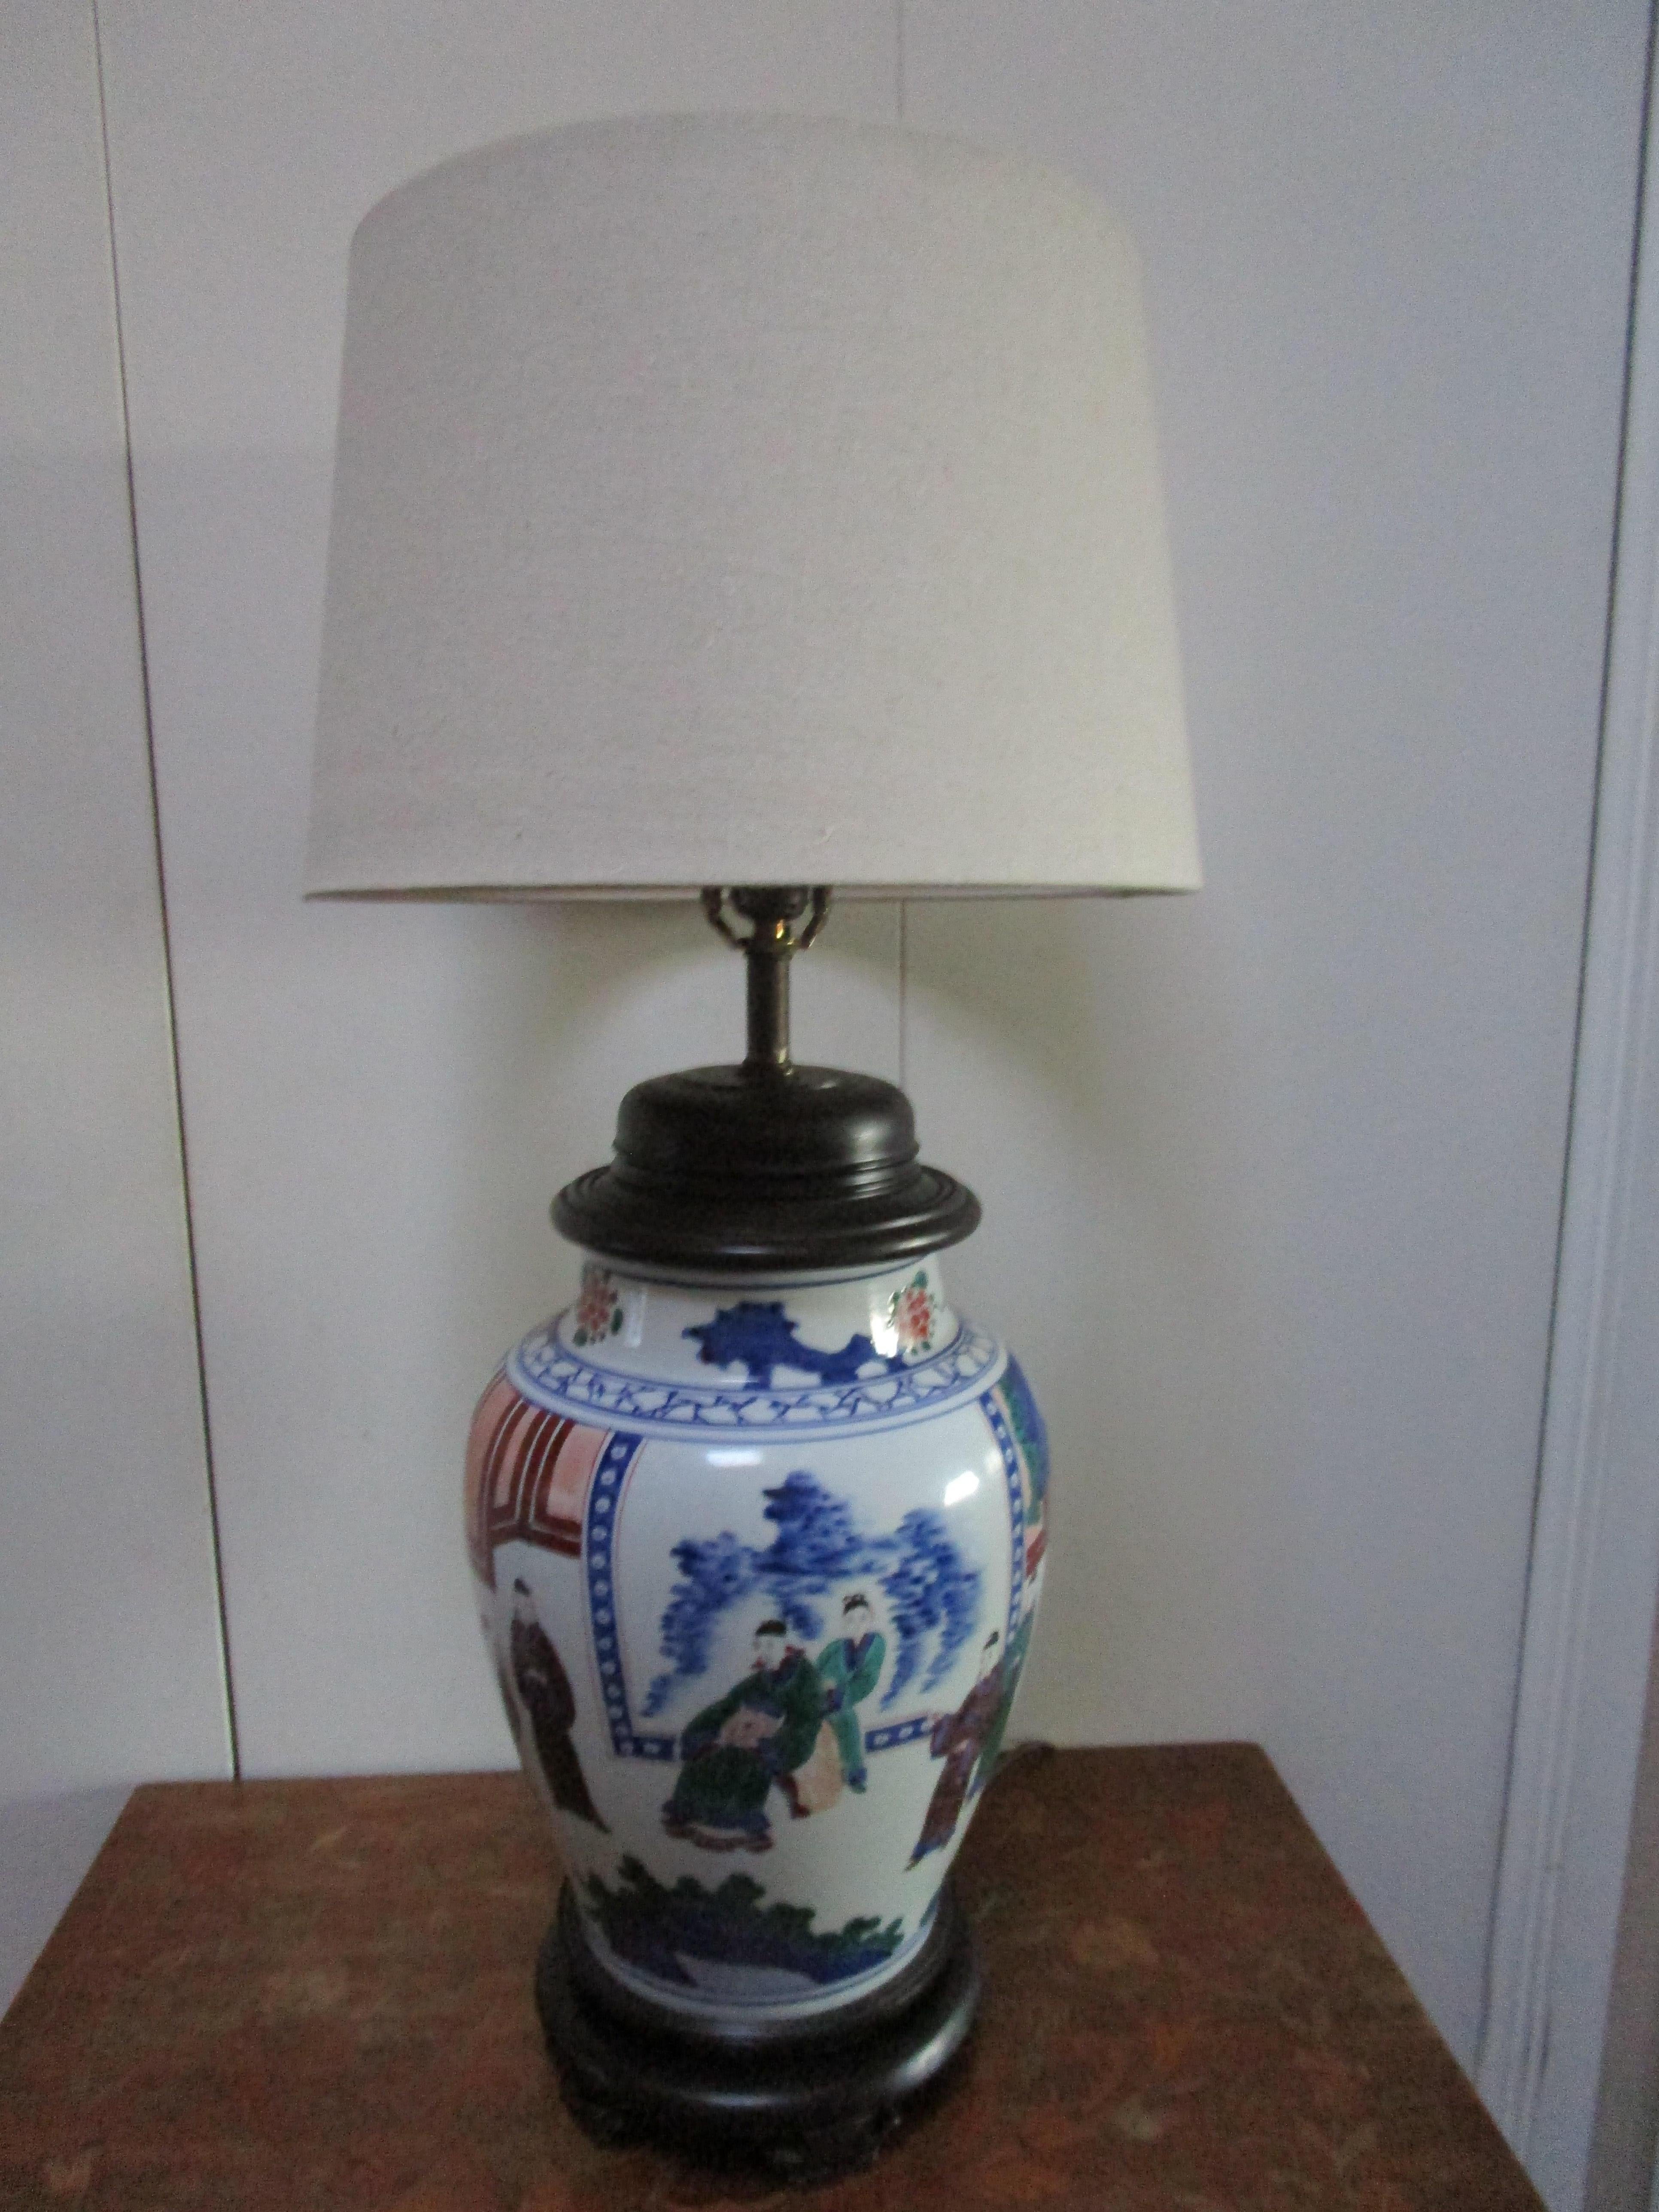 This mid century Chinese export lamp is an attention-getter for its scale and size. The vase with white ground enamel is in the form of a temple jar and colorful. Traditional Chinese export motif with scholars and landscape features.  It measures 35